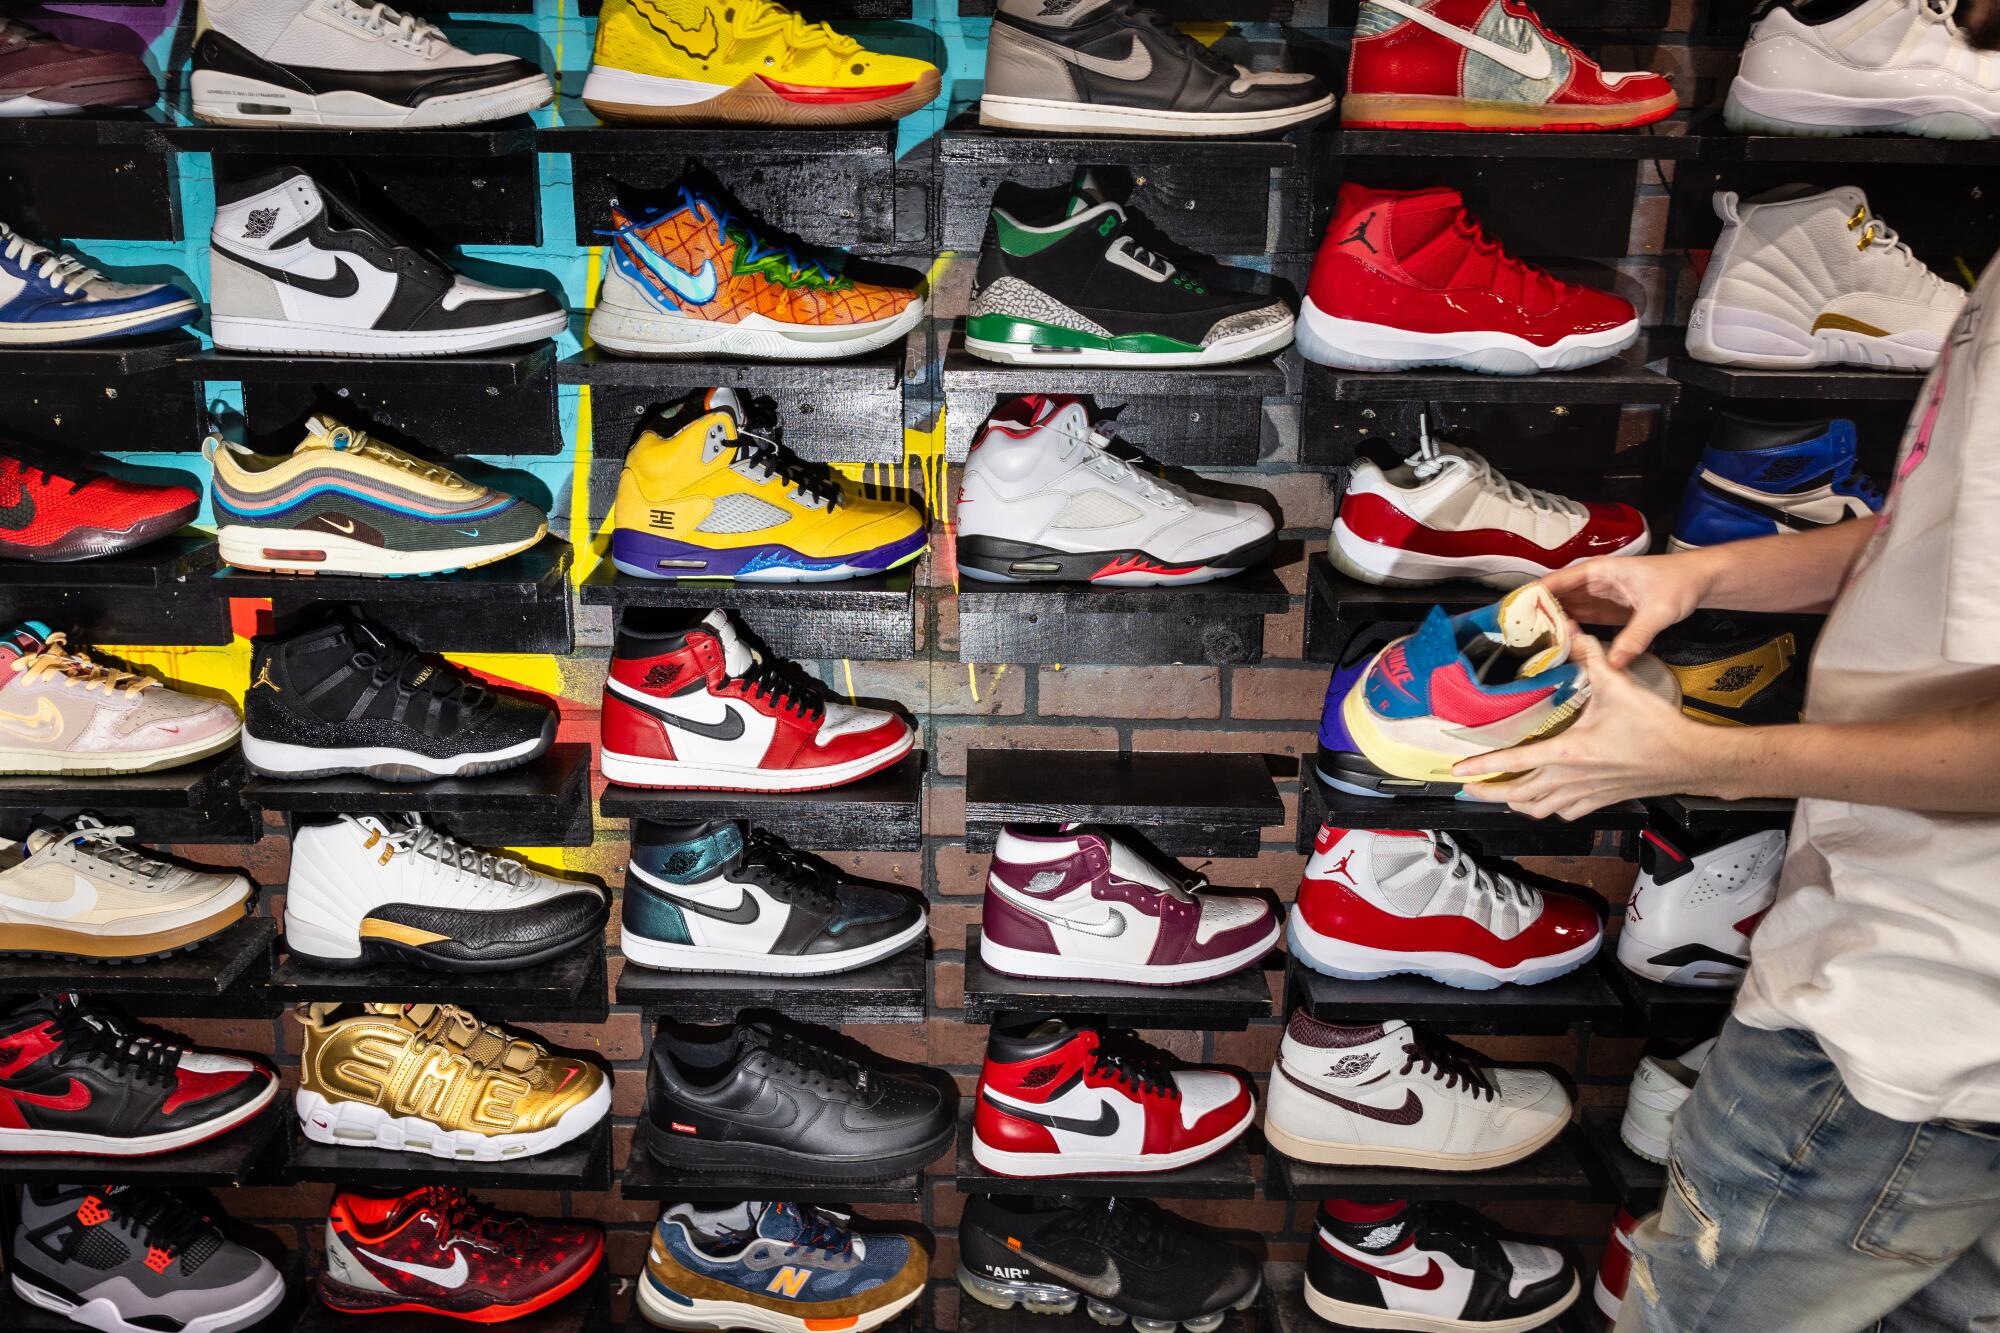 Are your sneakers knockoffs? He can tell by the smell - Los